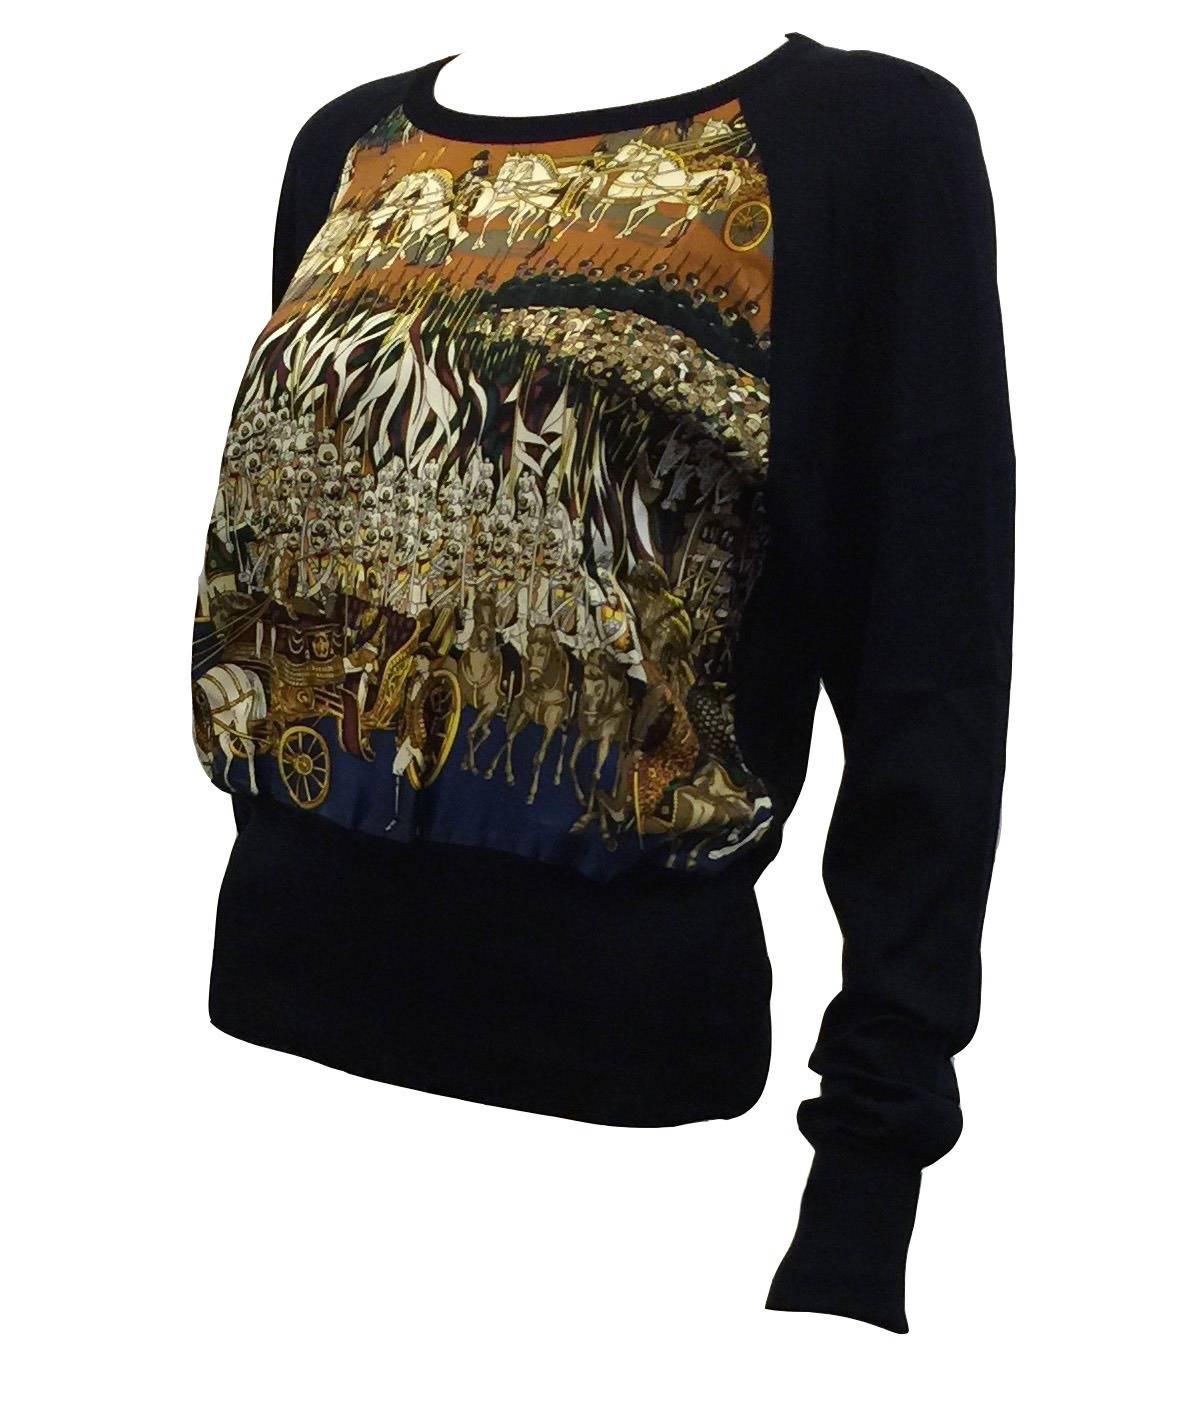 Hermes Paris Sweater with Silk Front.  
Grand Cortege A Moscou
Designed by Michel Duchene
It depicts a pageant of Military Units.
Navy Base with Gold 100% Silk Top
Hermes Silk Front Print with Navy Silk Long Sleeves
Back Round Neck